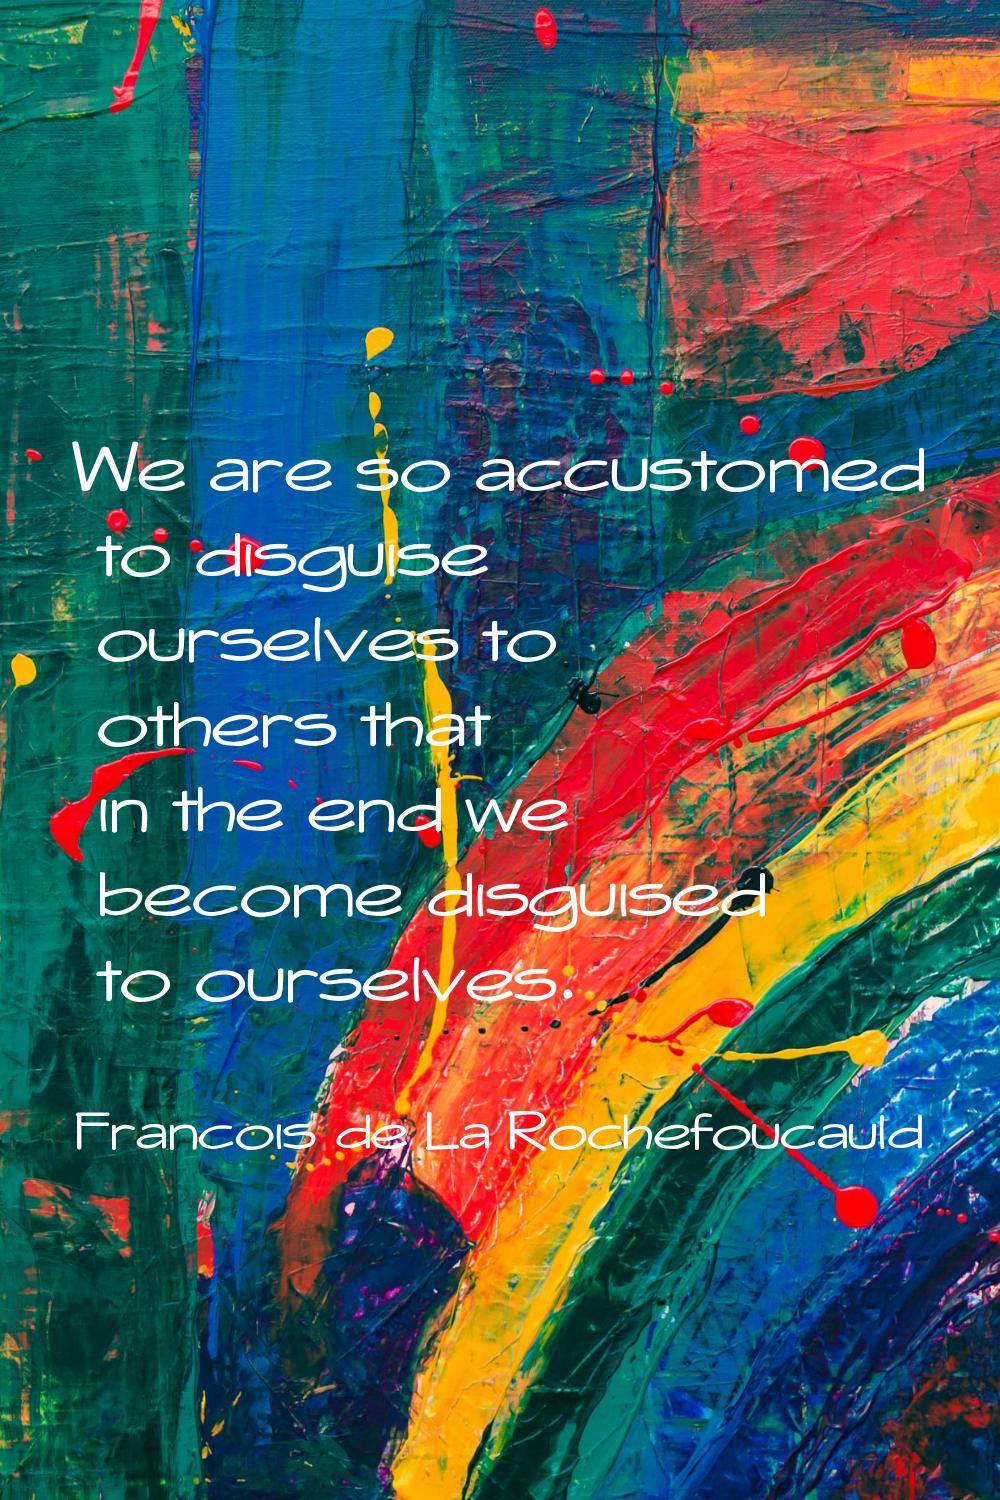 We are so accustomed to disguise ourselves to others that in the end we become disguised to ourselv